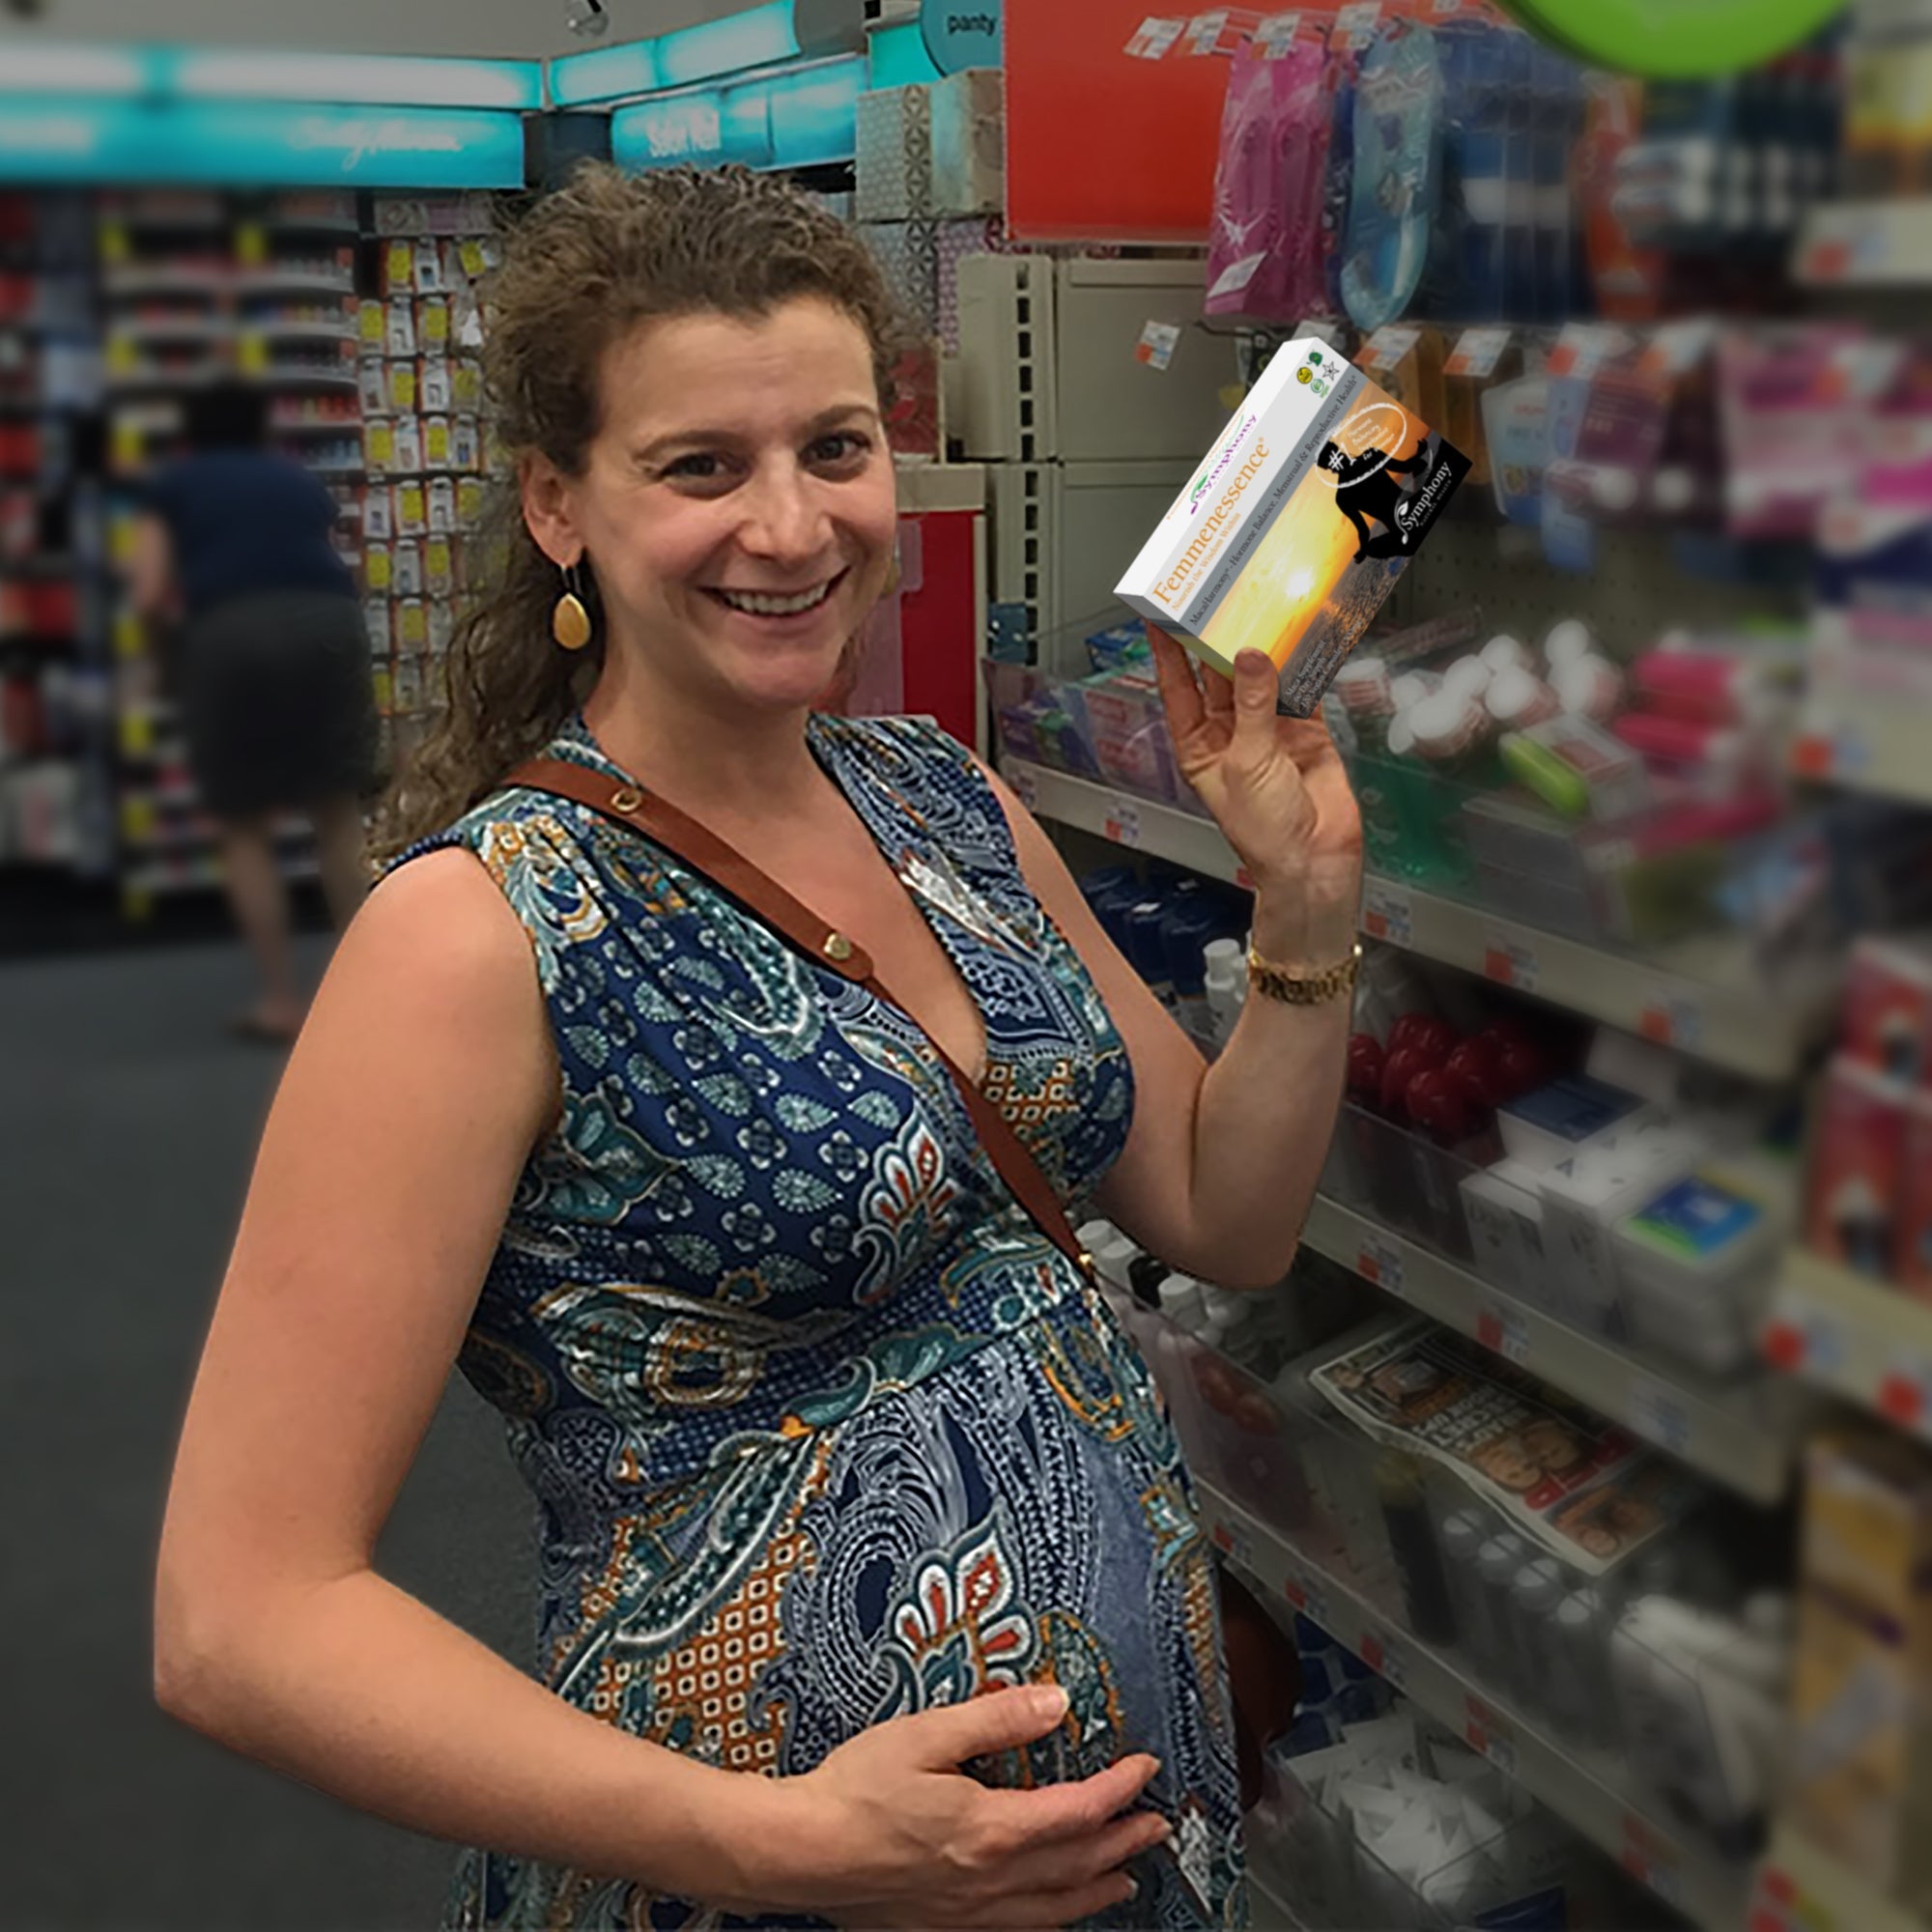 Pregnant white woman in grocery store, with brown curly hair wearing sleeveless blue printed dress, holding stomach and a box of Femmenessence Maca Harmony